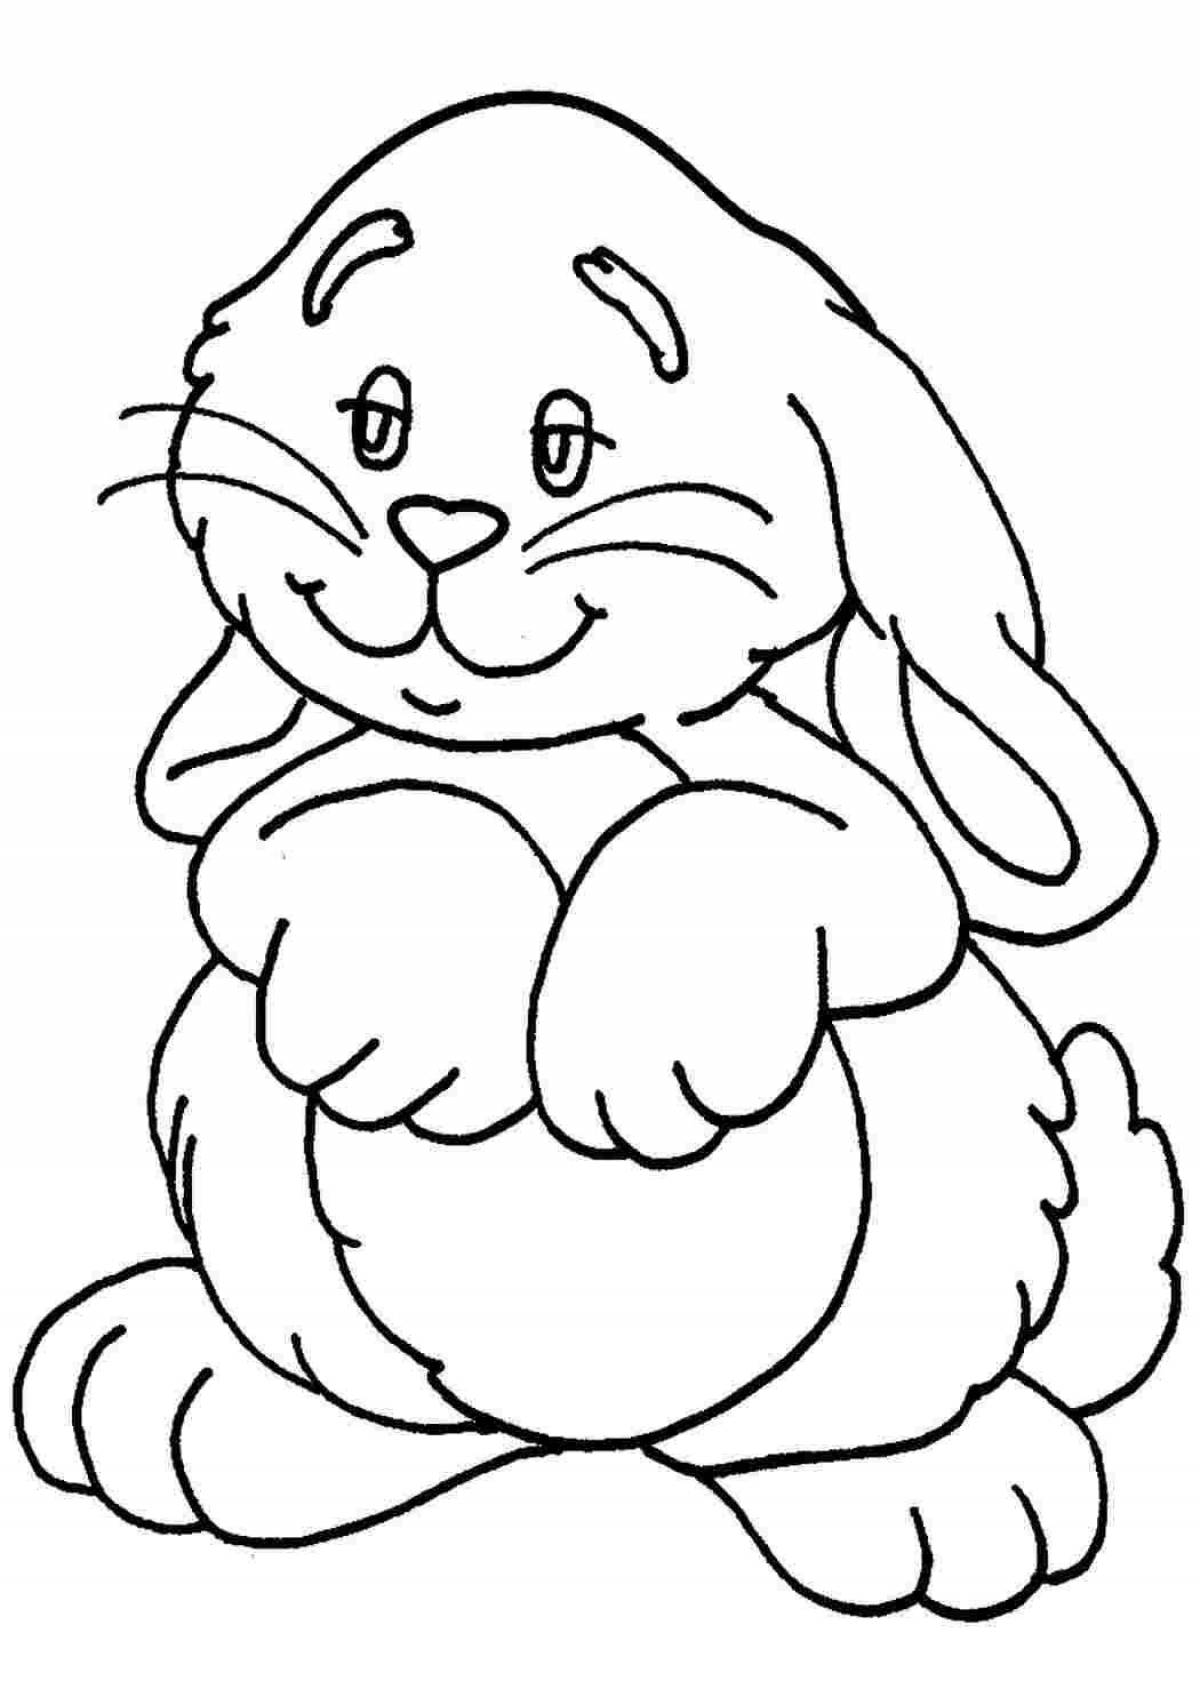 Drawing of a cute rabbit for children